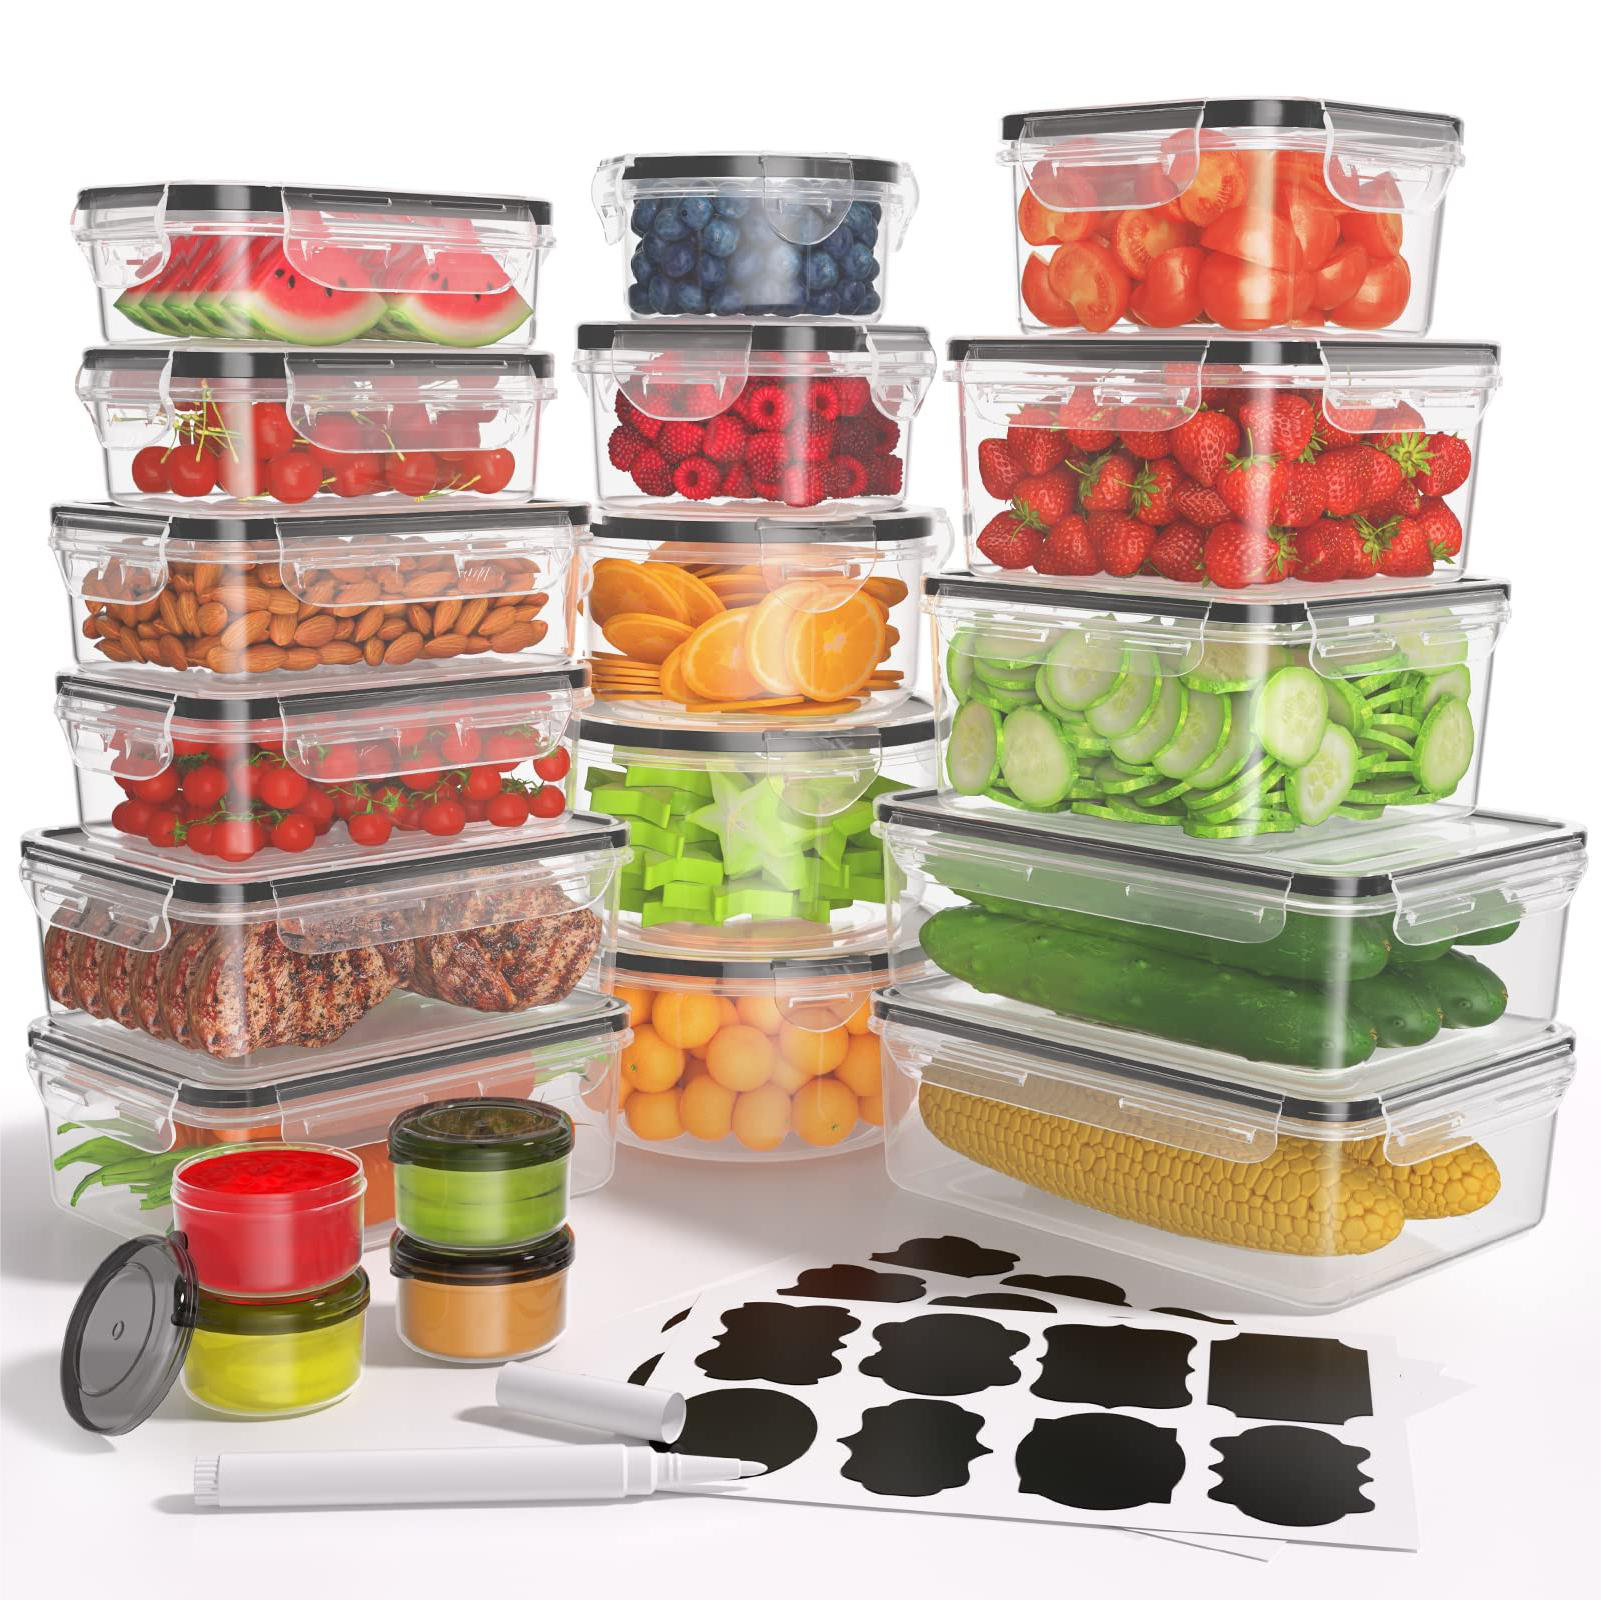 50 PCS Food Storage Containers with Lids Airtight, Plastic Lunch Containers  for Pantry Kitchen Organization Storage (25 Lids + 25 Containers), Meal